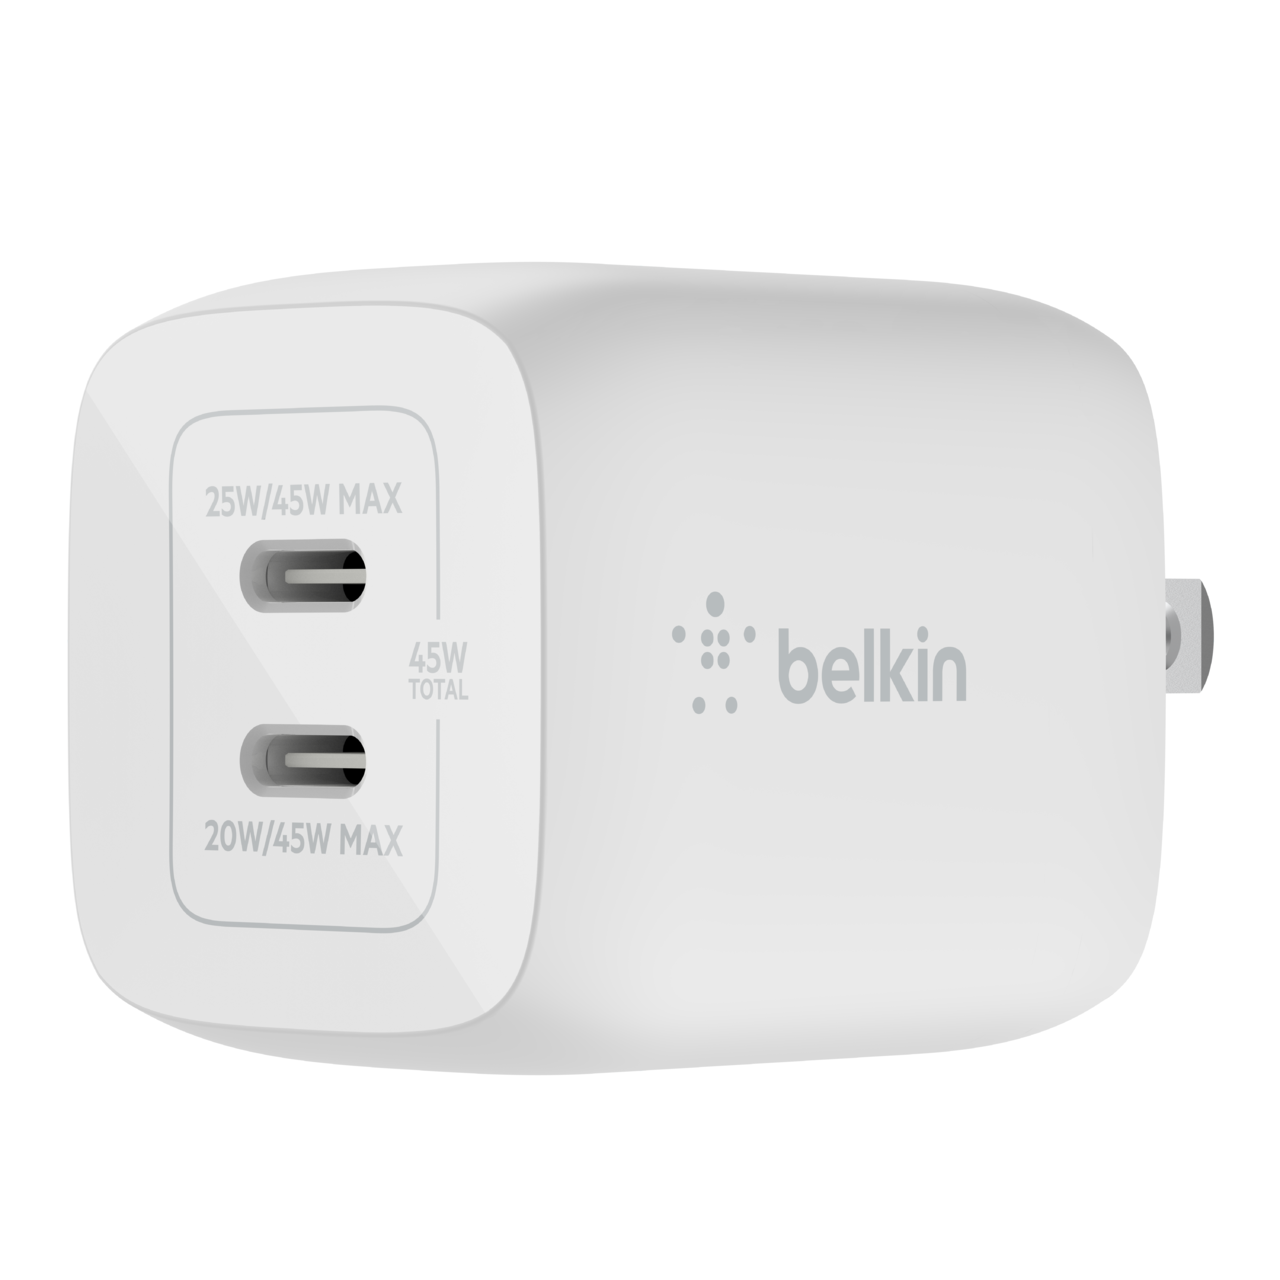 Belkin Official Support Getting to know the Belkin wireless routers